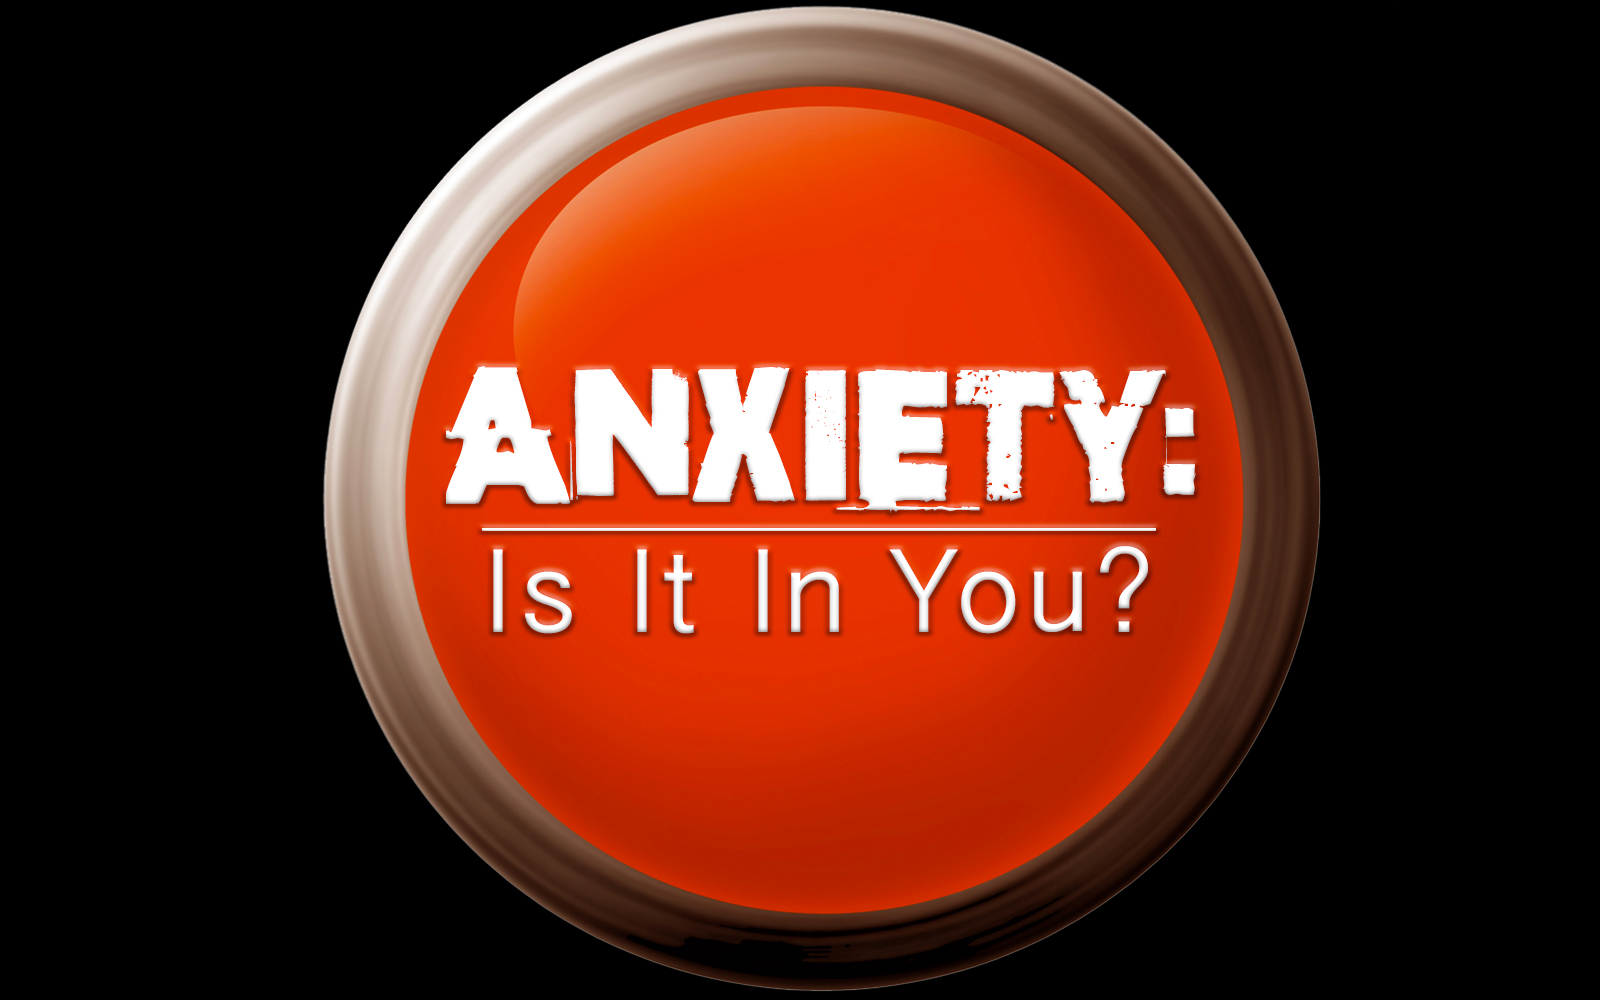 Anxiety:  Is it in You? Image